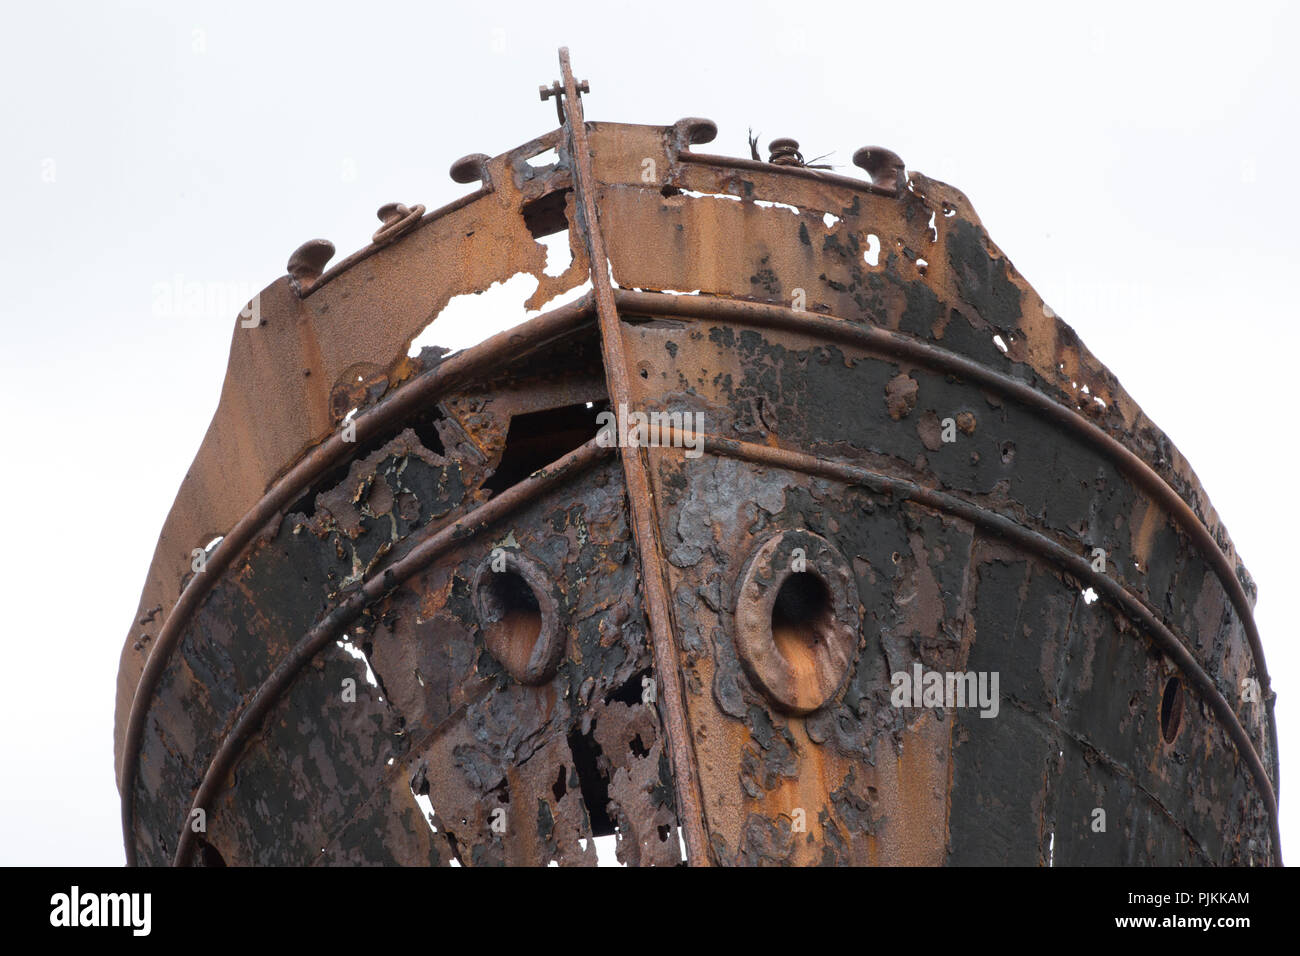 Iceland, Djupavik, Westfjords, former herring factory, stranded ship, bow with anchor hawse holes, eaten away by the rust Stock Photo